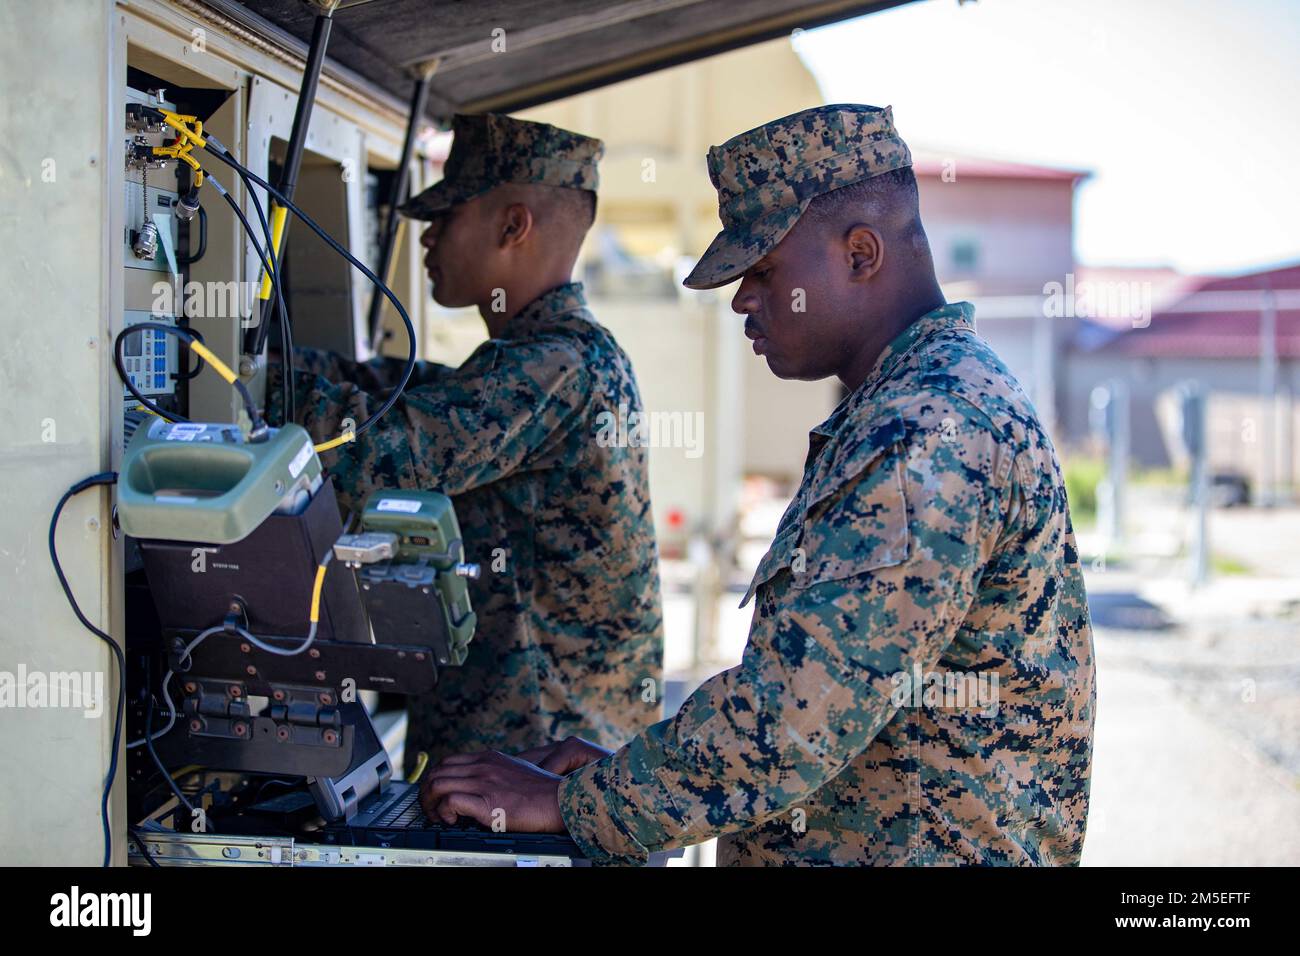 U.S. Marine Corps Cpl Ricardo Aguilar, left and Cpl. Ahmed Spence, right, both satellite communications operators with 9th Communication Battalion, I Marine Expeditionary Force Information Group, sets up connection on the Very Small Aperture Terminal at Marine Corps Base Camp Pendleton, California, March 11, 2022. This training allows the 9th Communication Battalion to be capable of operating, defending, and preserving information networks to enable command and control for the commander in all domains, and support and conduct Marine Air Ground Task Force operations in the information environme Stock Photo